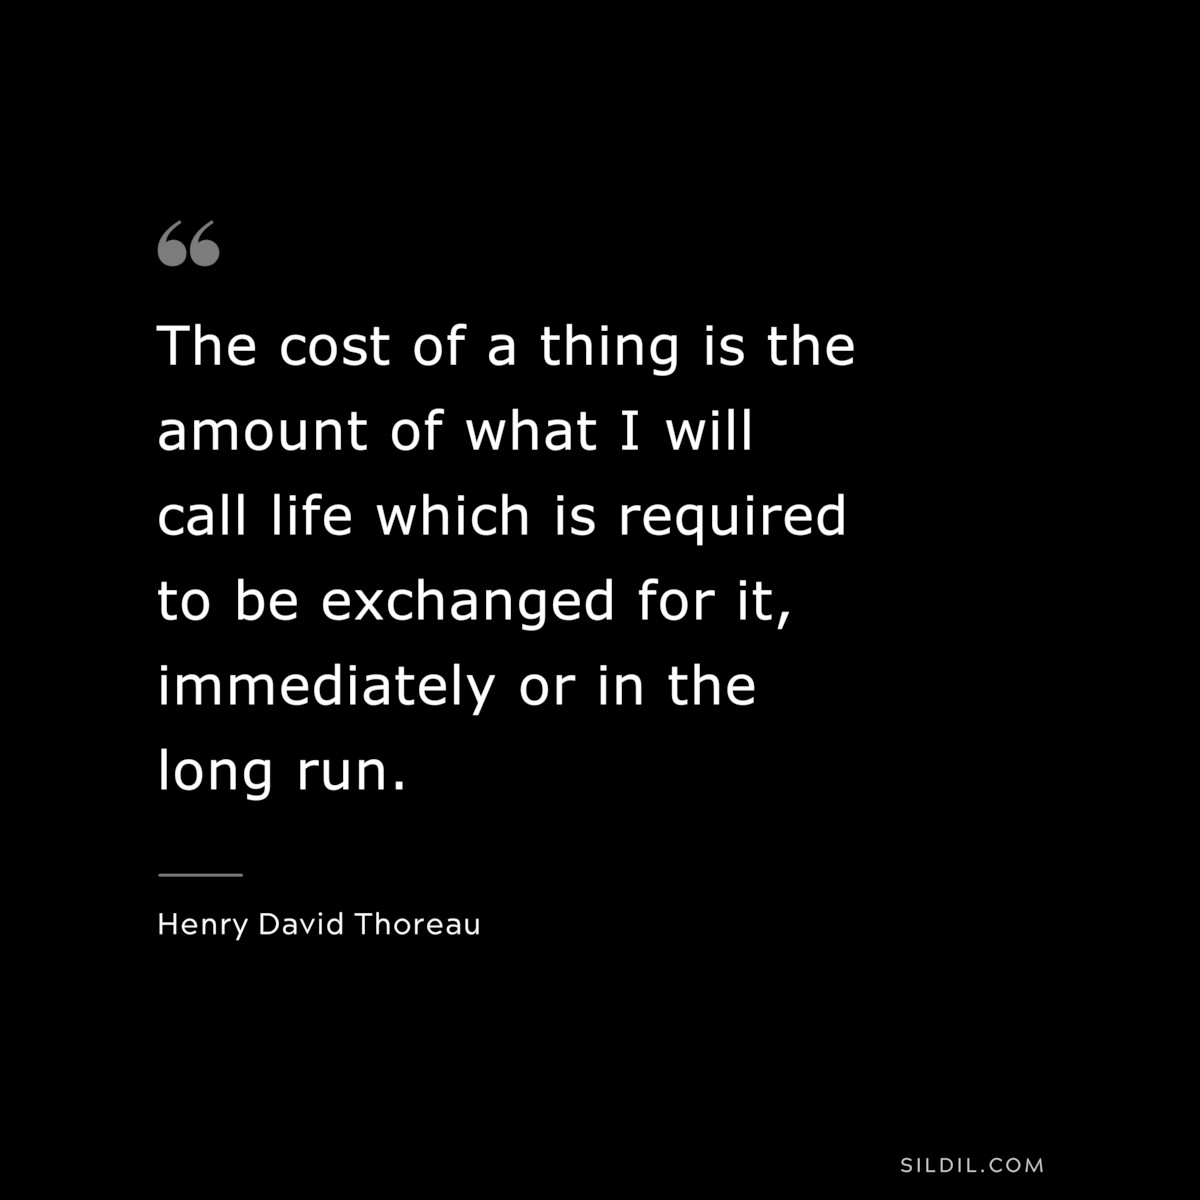 The cost of a thing is the amount of what I will call life which is required to be exchanged for it, immediately or in the long run. — Henry David Thoreau